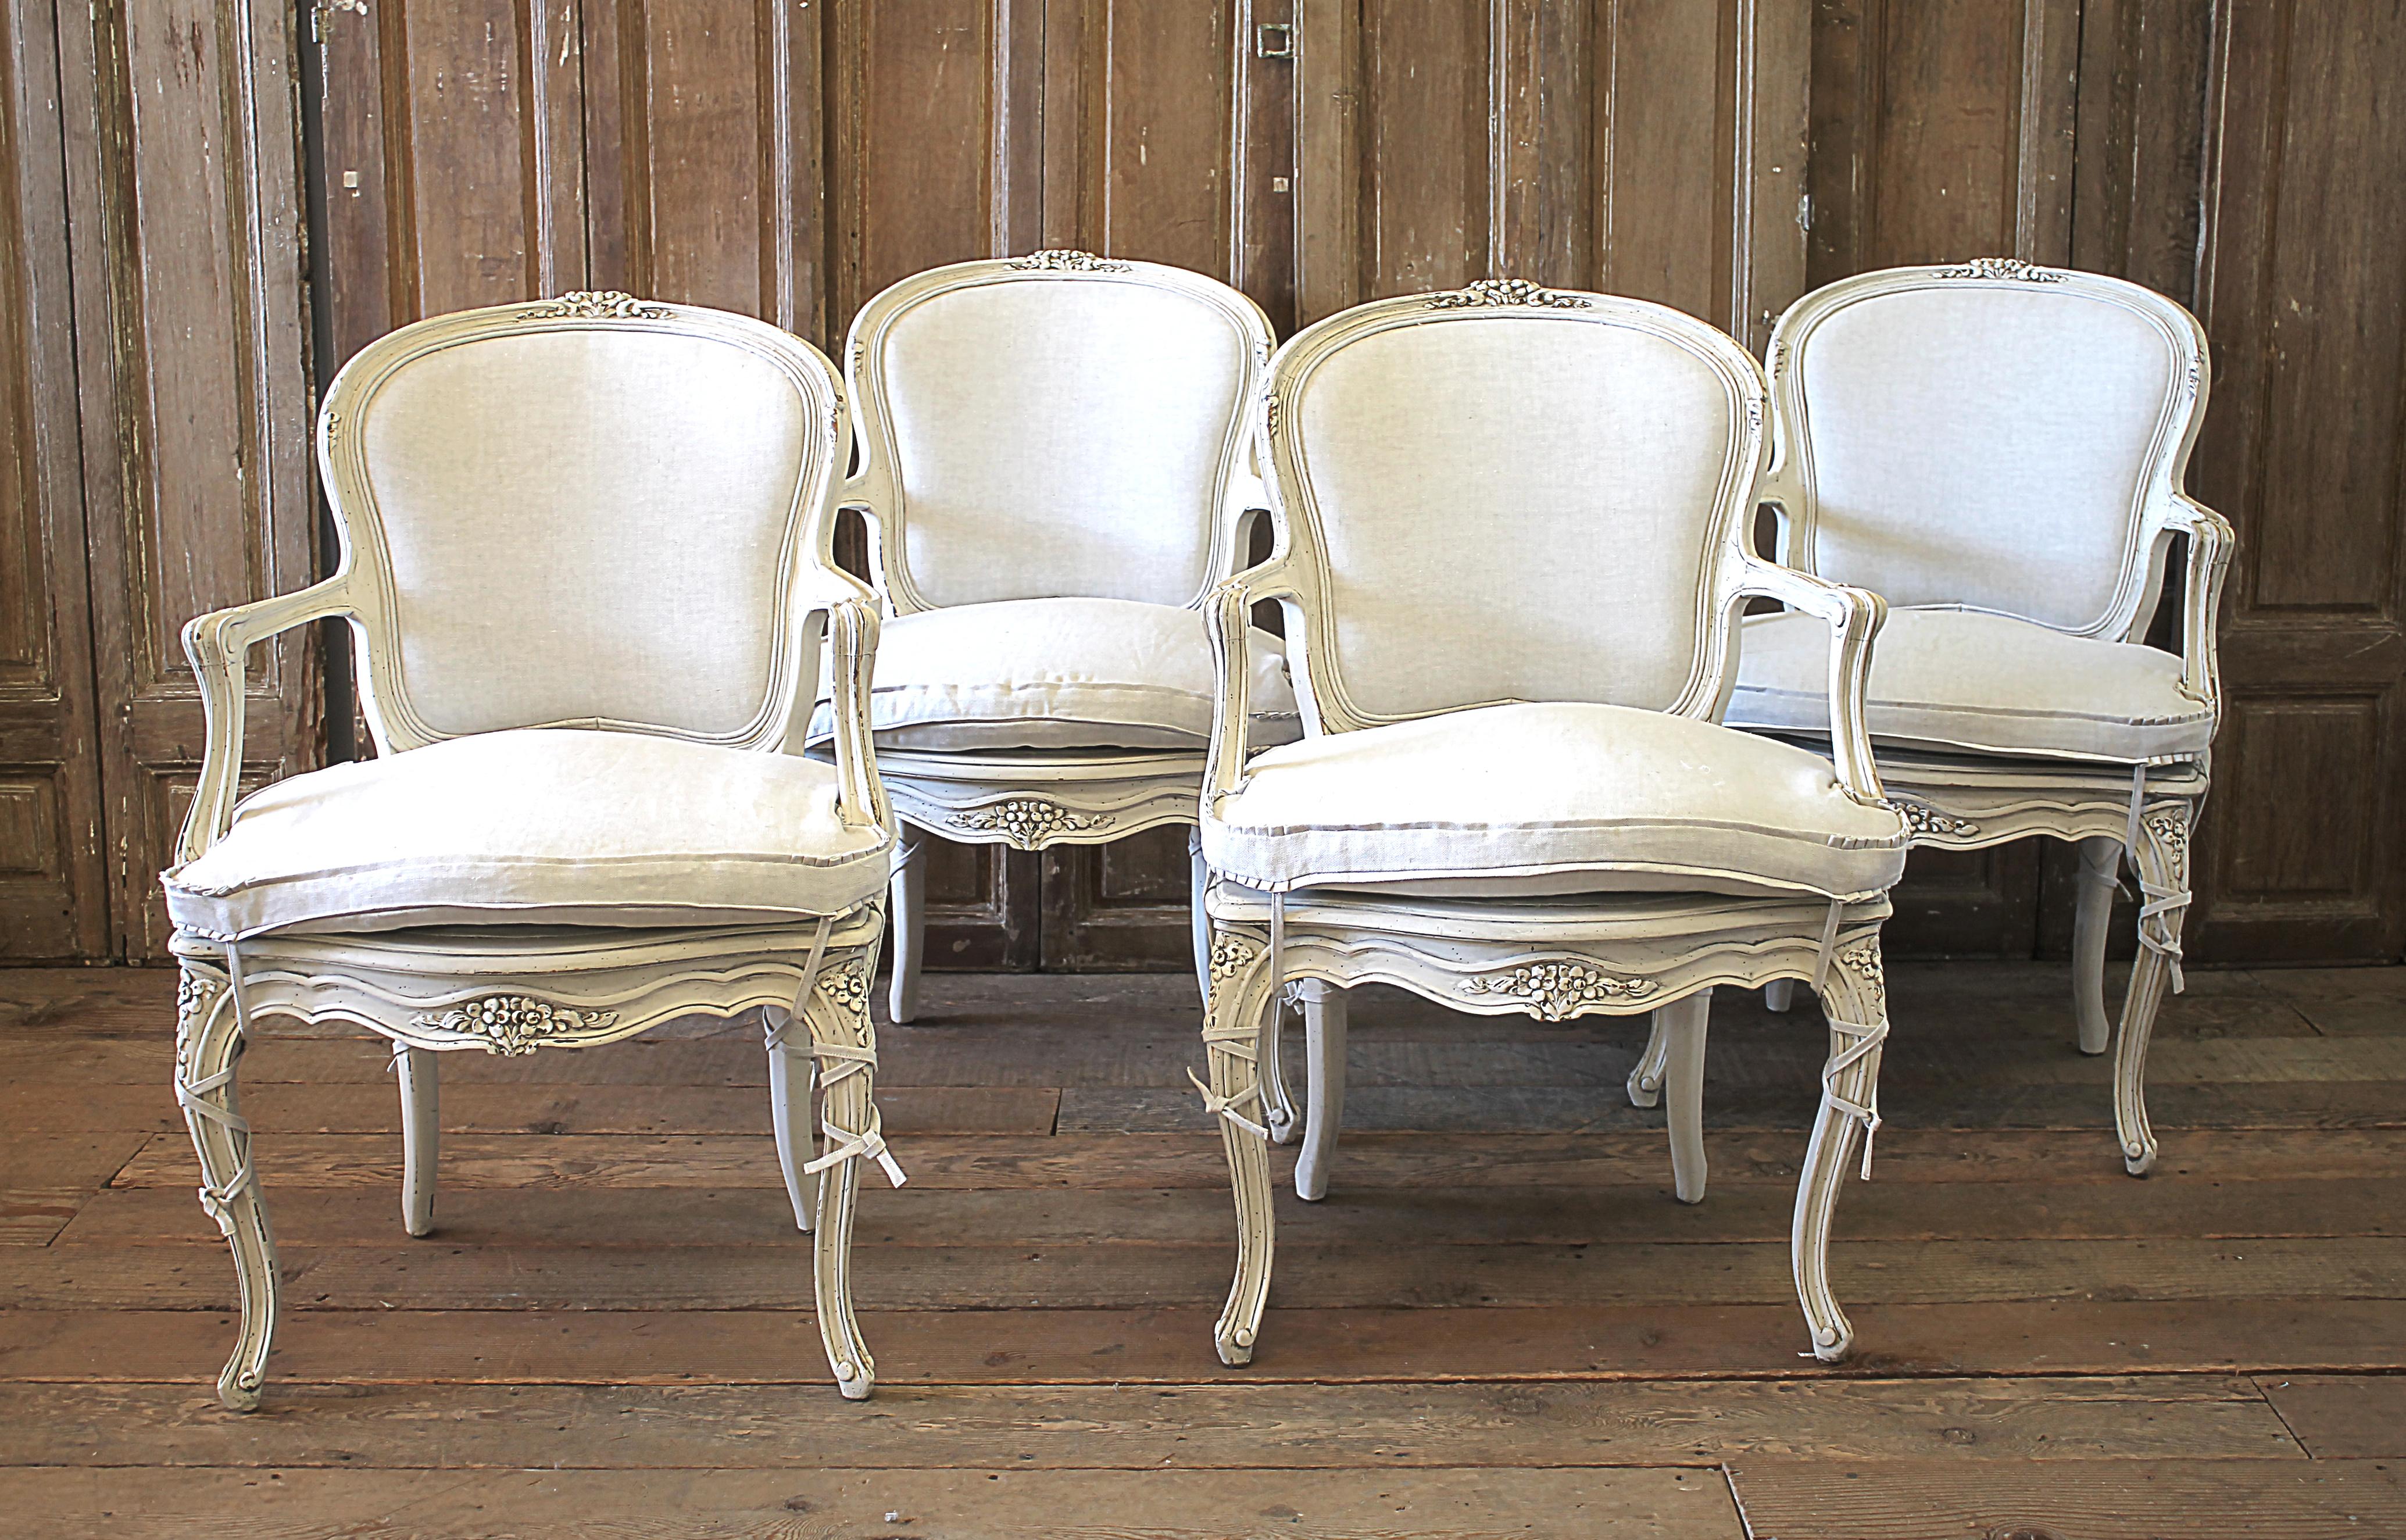 Early 20th century Louis XV style carved and painted open armchairs
Painted in an oyster white finish, with antique patina. The color is an off white, with natural linen upholstery. The natural linen is a greige color, and custom fitted foam